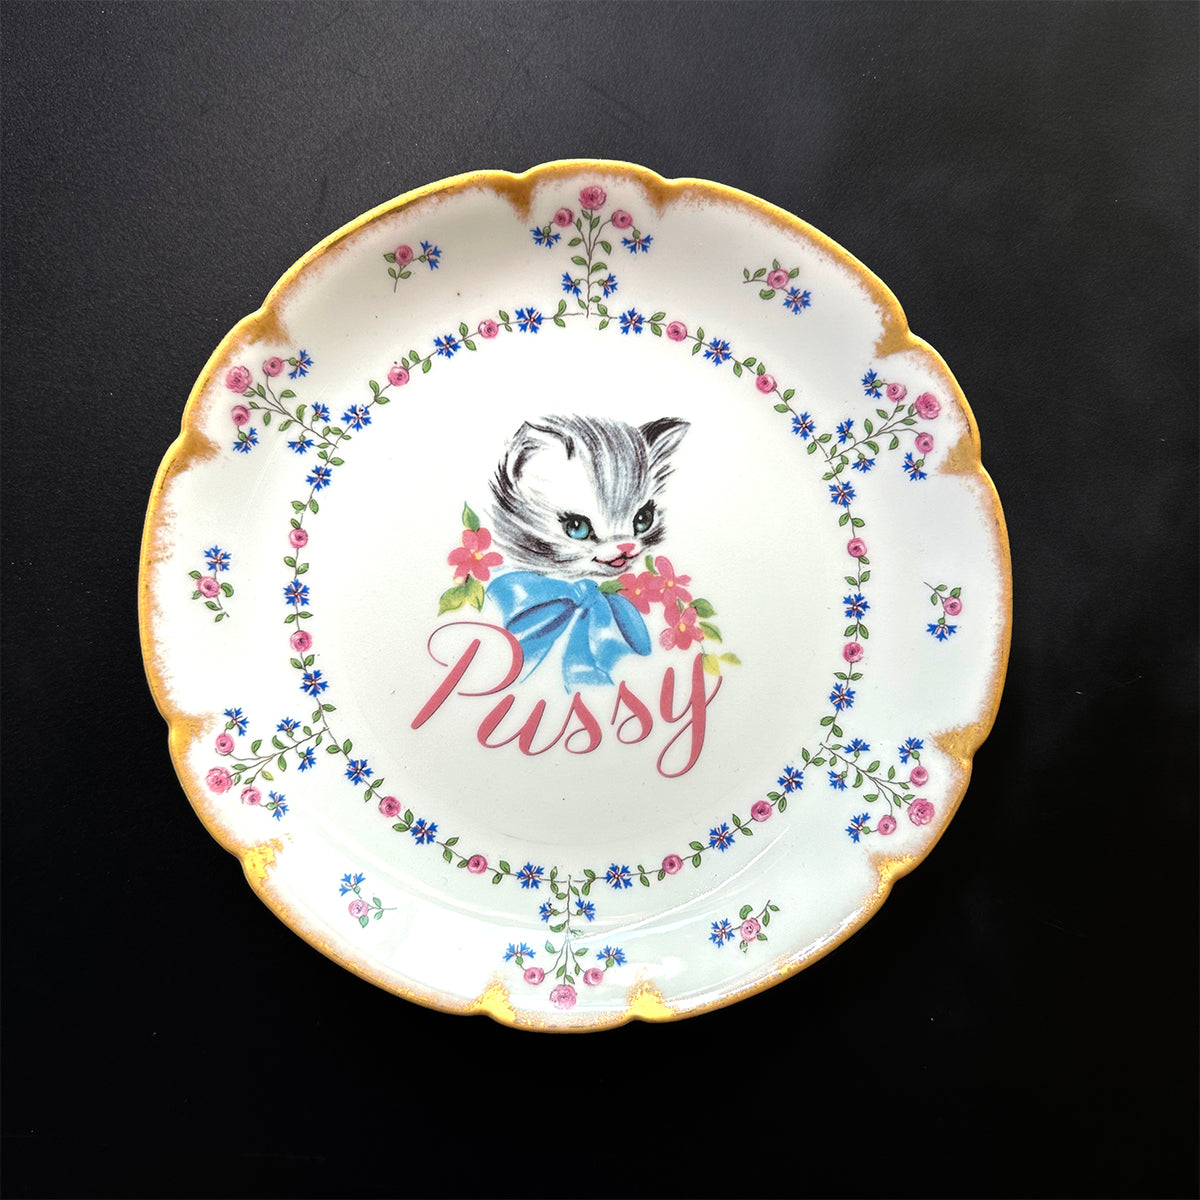 Copy of Vintage Art Plate -  Cat plate - "Pussy"